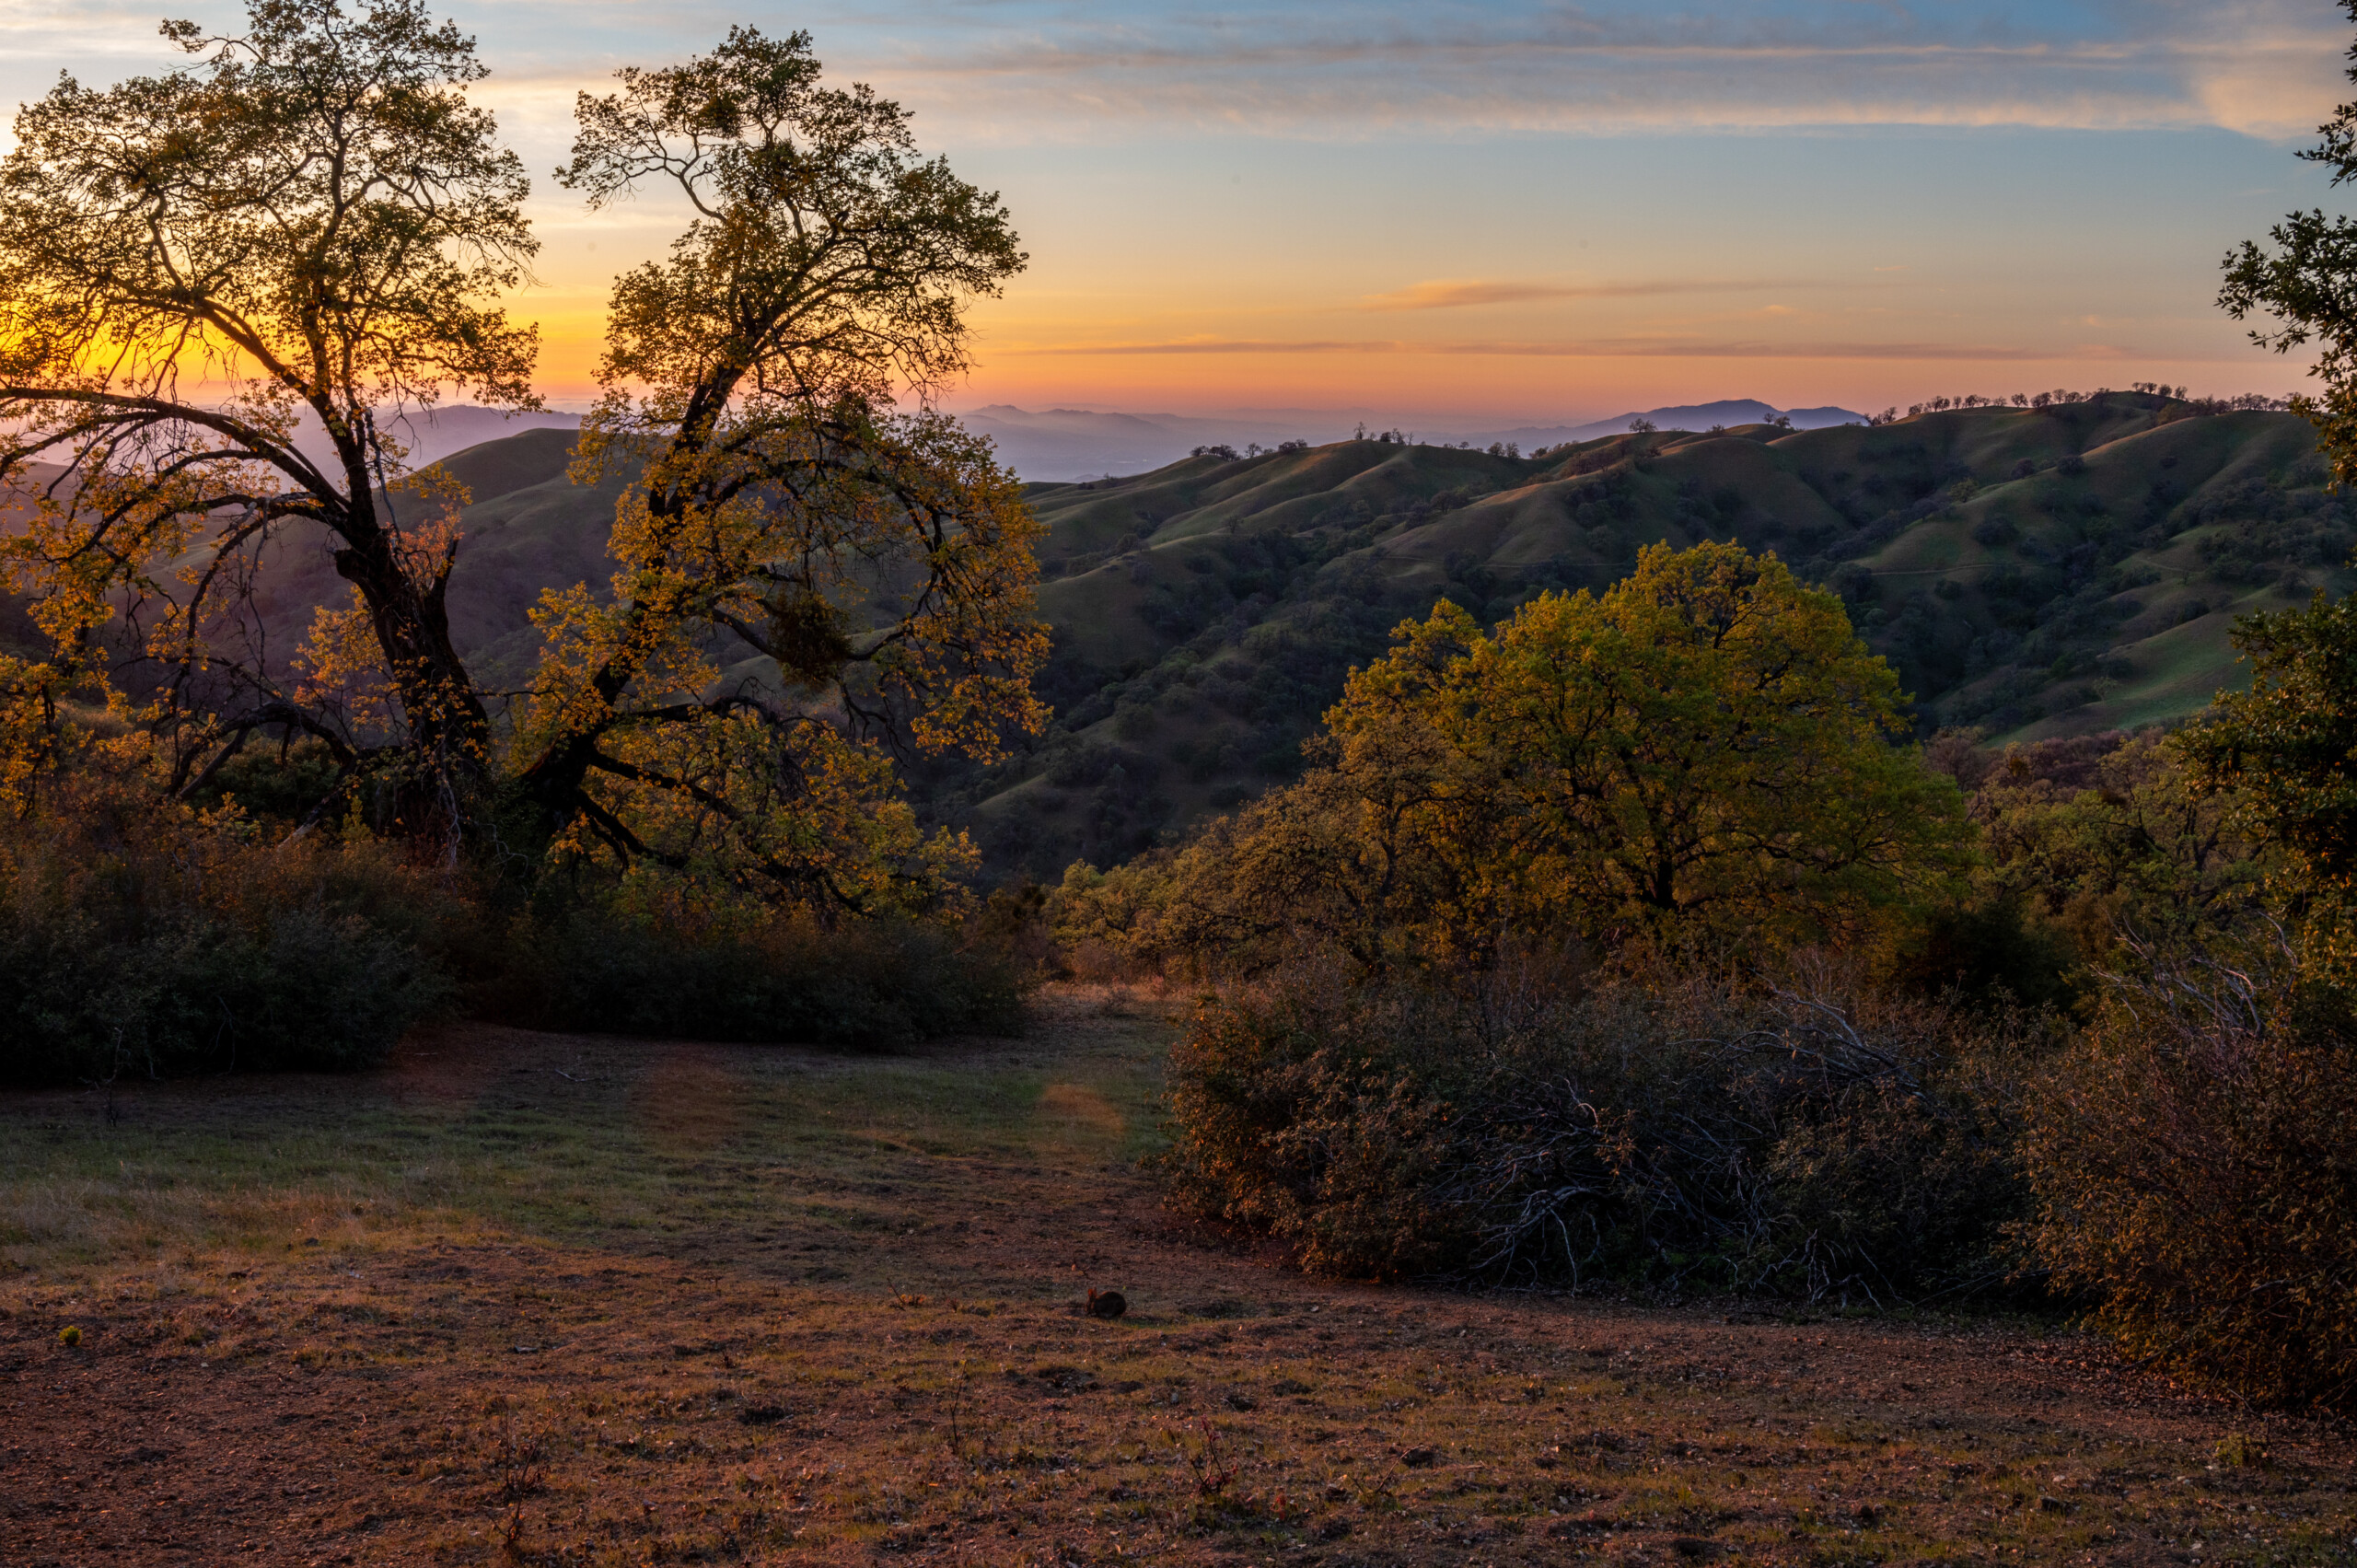 Sunset behind trees in the Ohlone wilderness